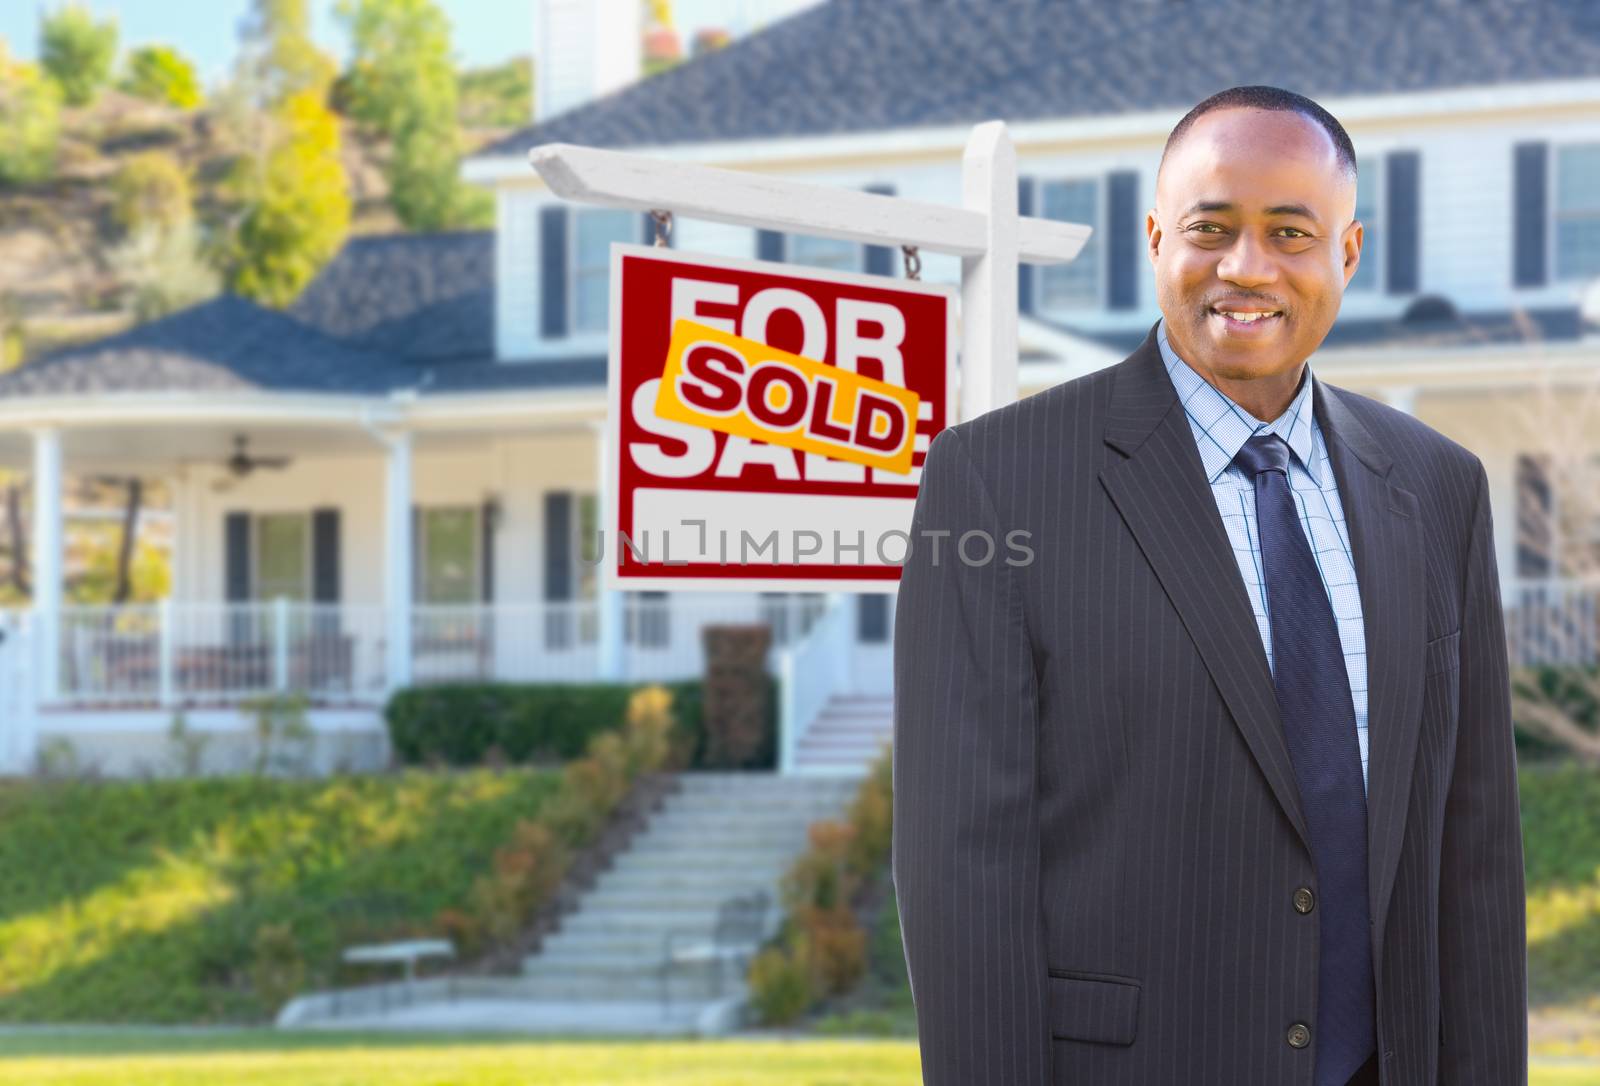 African American AgentIn Front of Beautiful Custom House and Sold For Sale Real Estate Sign.